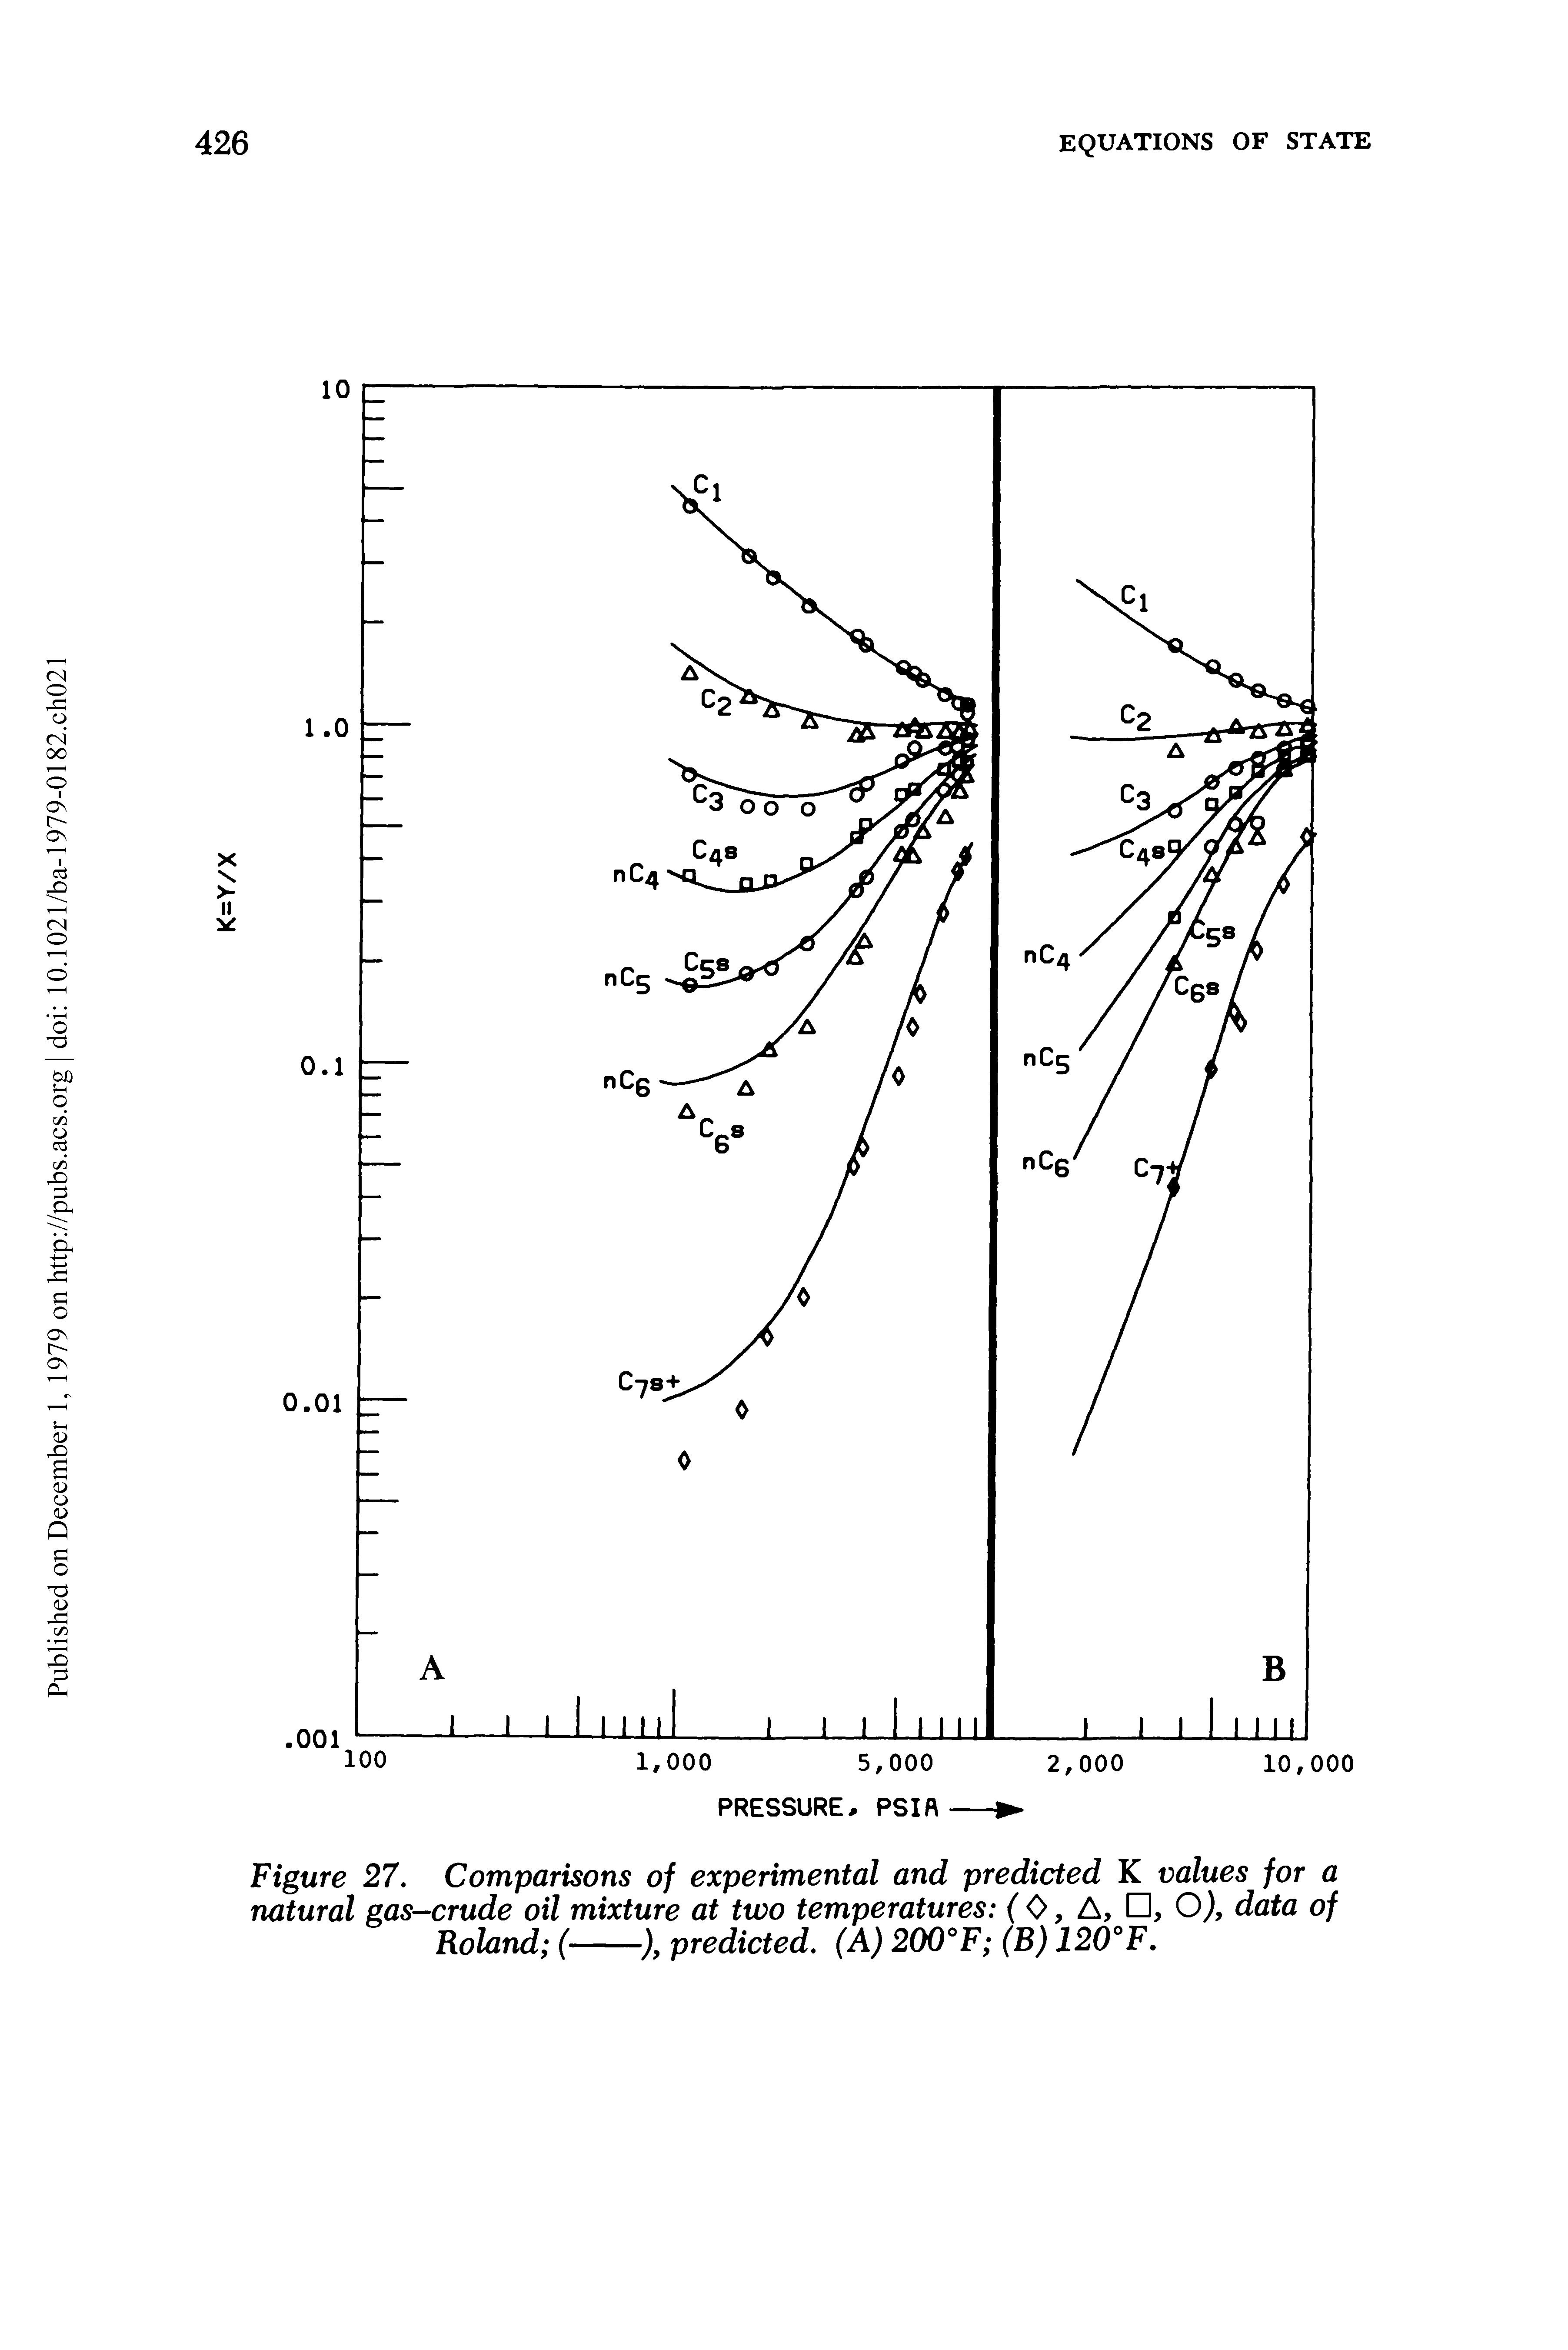 Figure 27. Comparisons of experimental and predicted K values for a natural gas-crude oil mixture at two temperatures ( 0, A, , O), data of Roland (-----------------), predicted. (A) 200°F (B) 120°F.